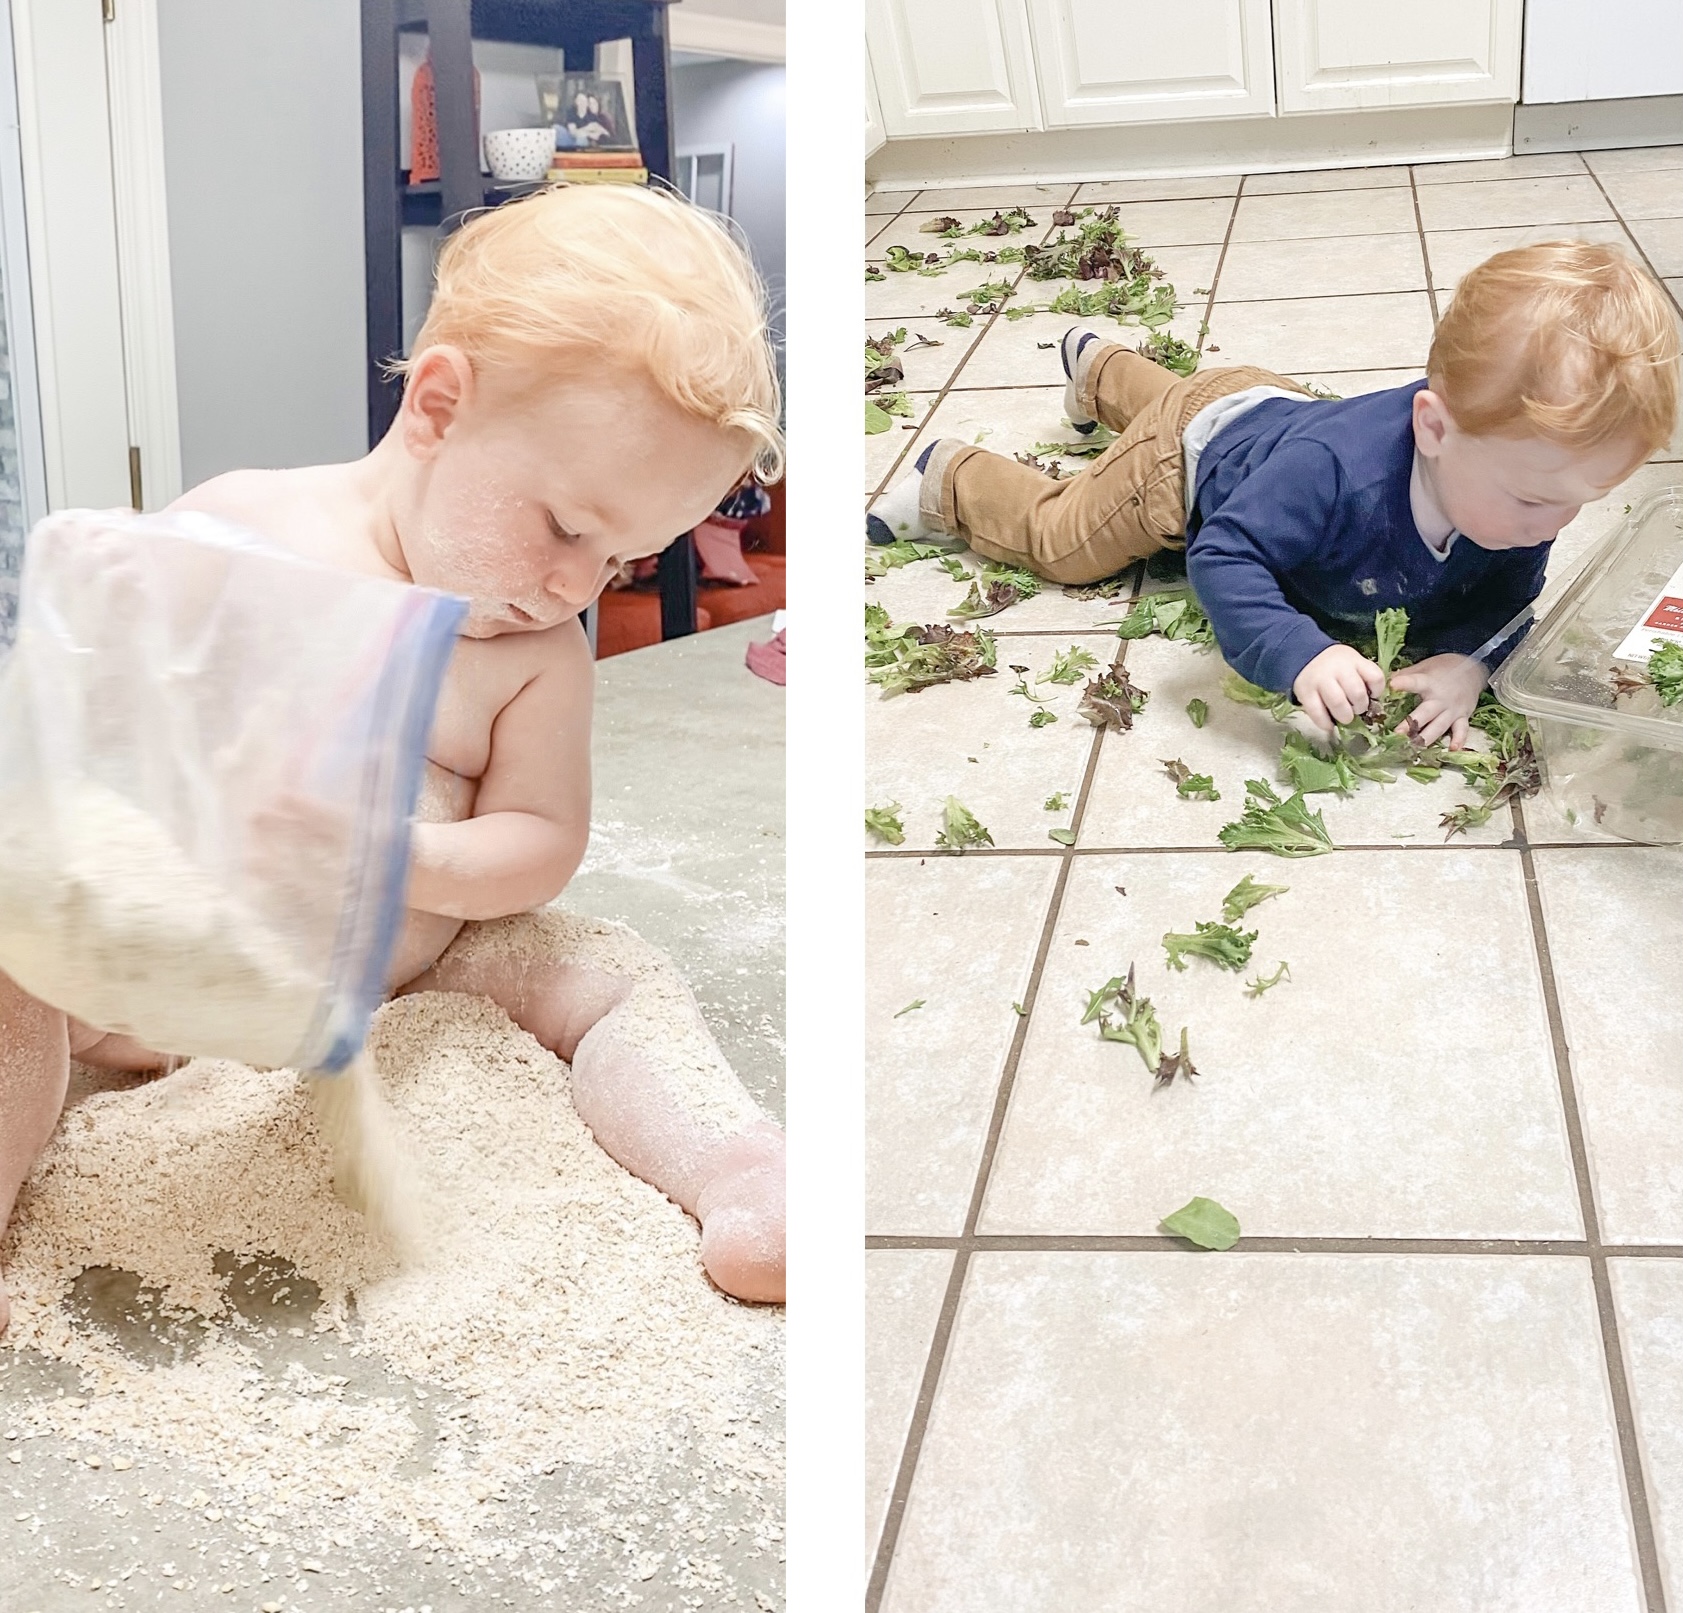 toddler pouring oat flour on floor and laying in lettuce